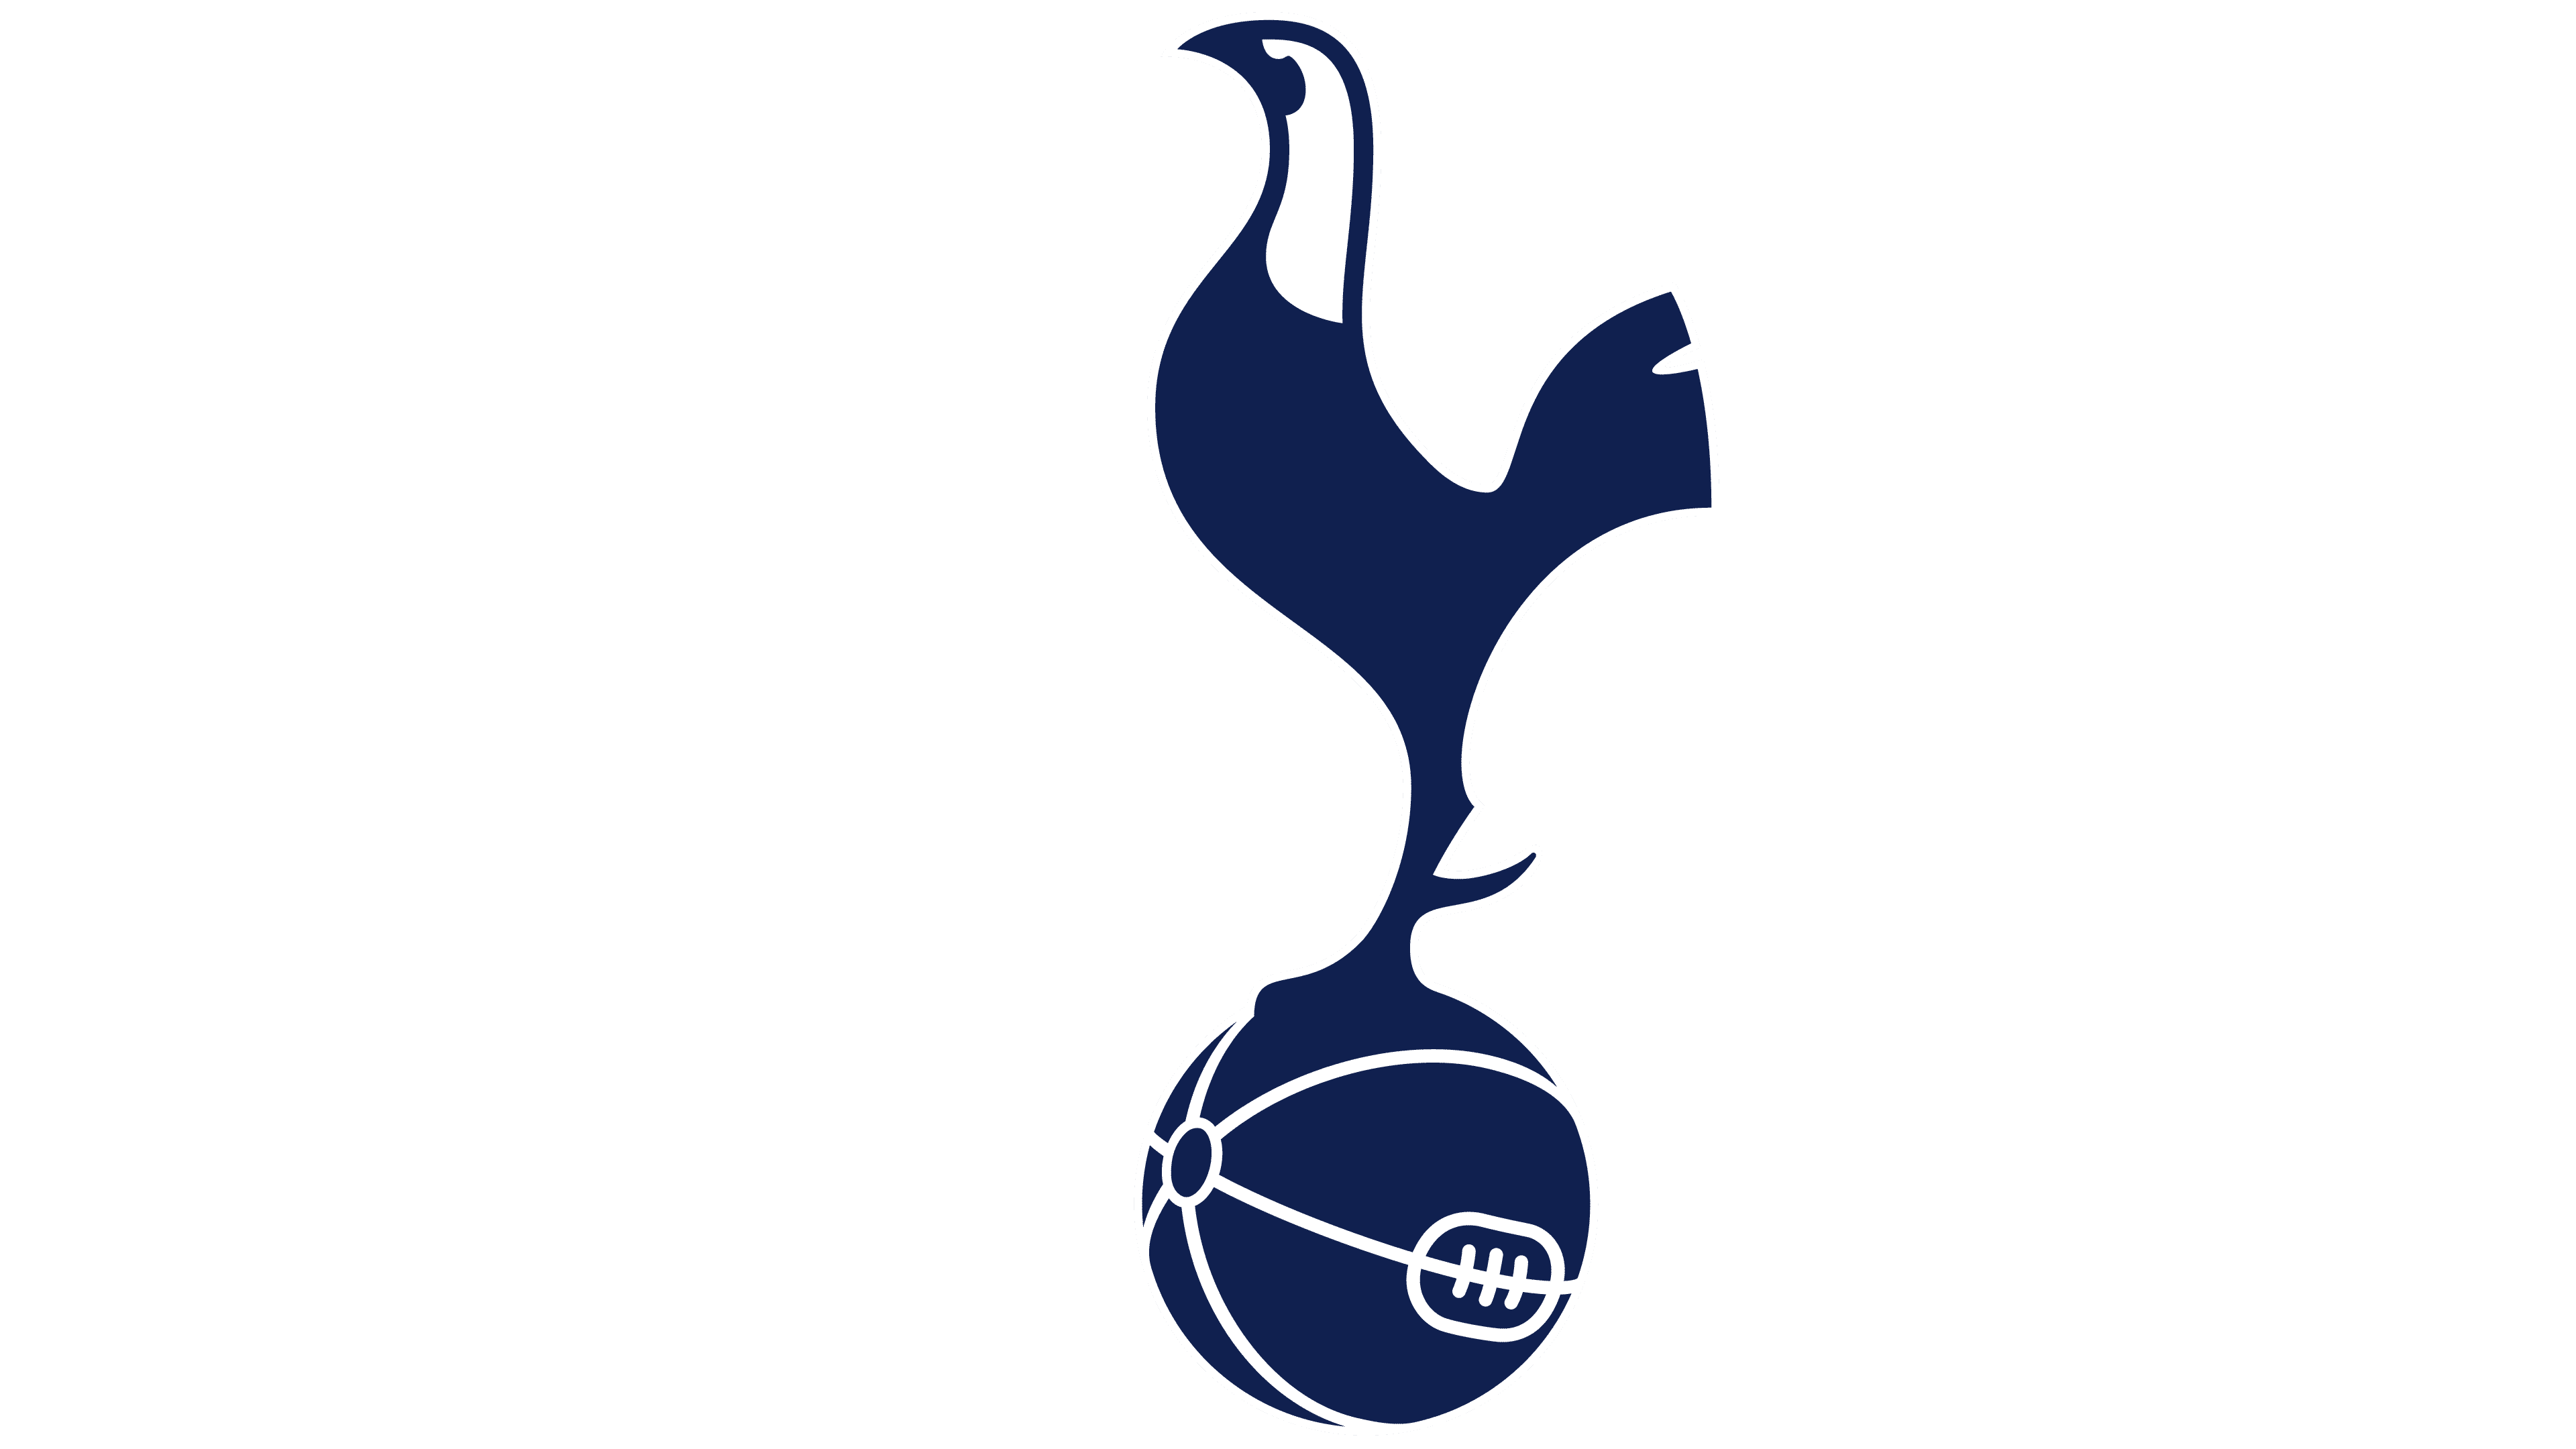 Tottenham Hotspur Logo The Most Famous Brands And Company Logos In The World